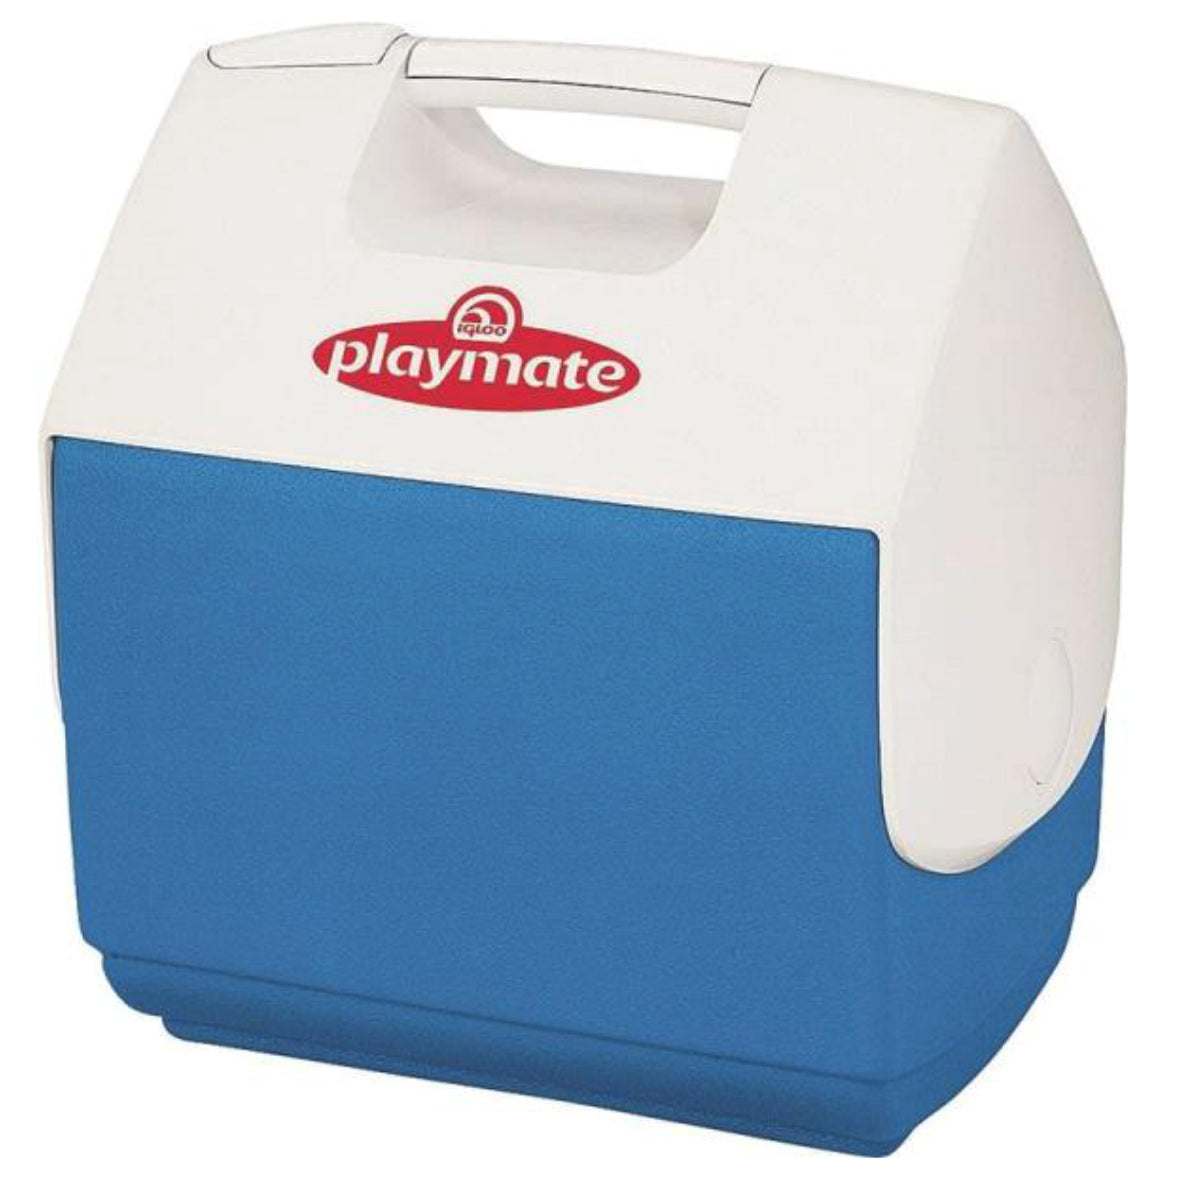 Igloo 32643 Playmate Pal Personal Ice Chests, 7 Quart